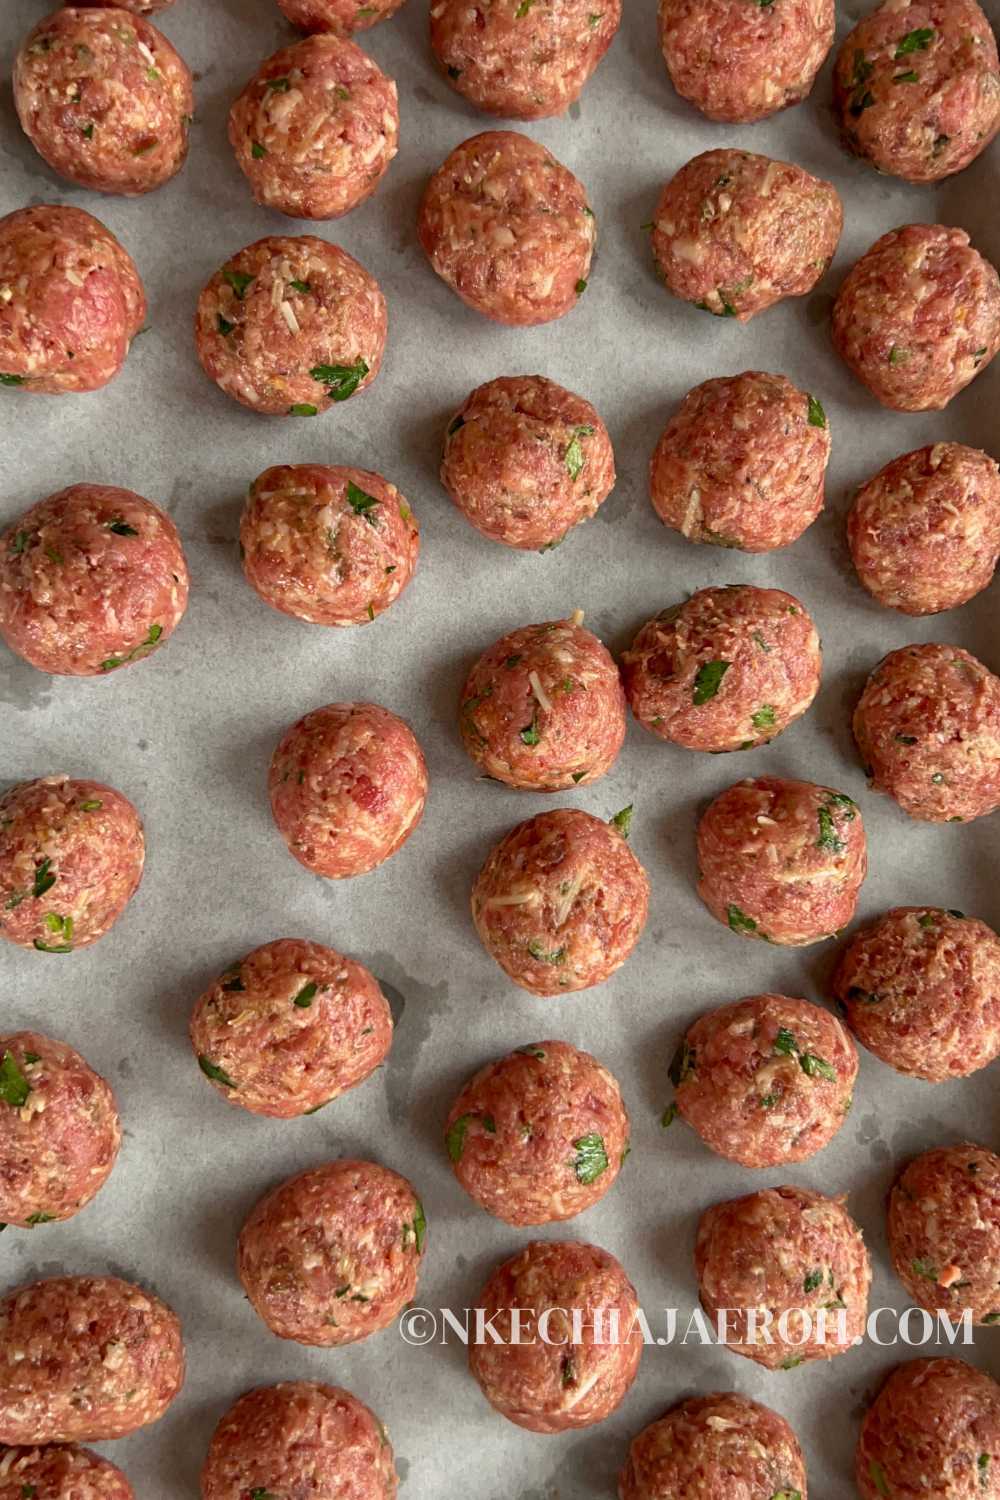 Place formed meatballs on a lined cookie sheet; I suggest forming all the meatballs before you start air frying them because the air frying part happens quickly.